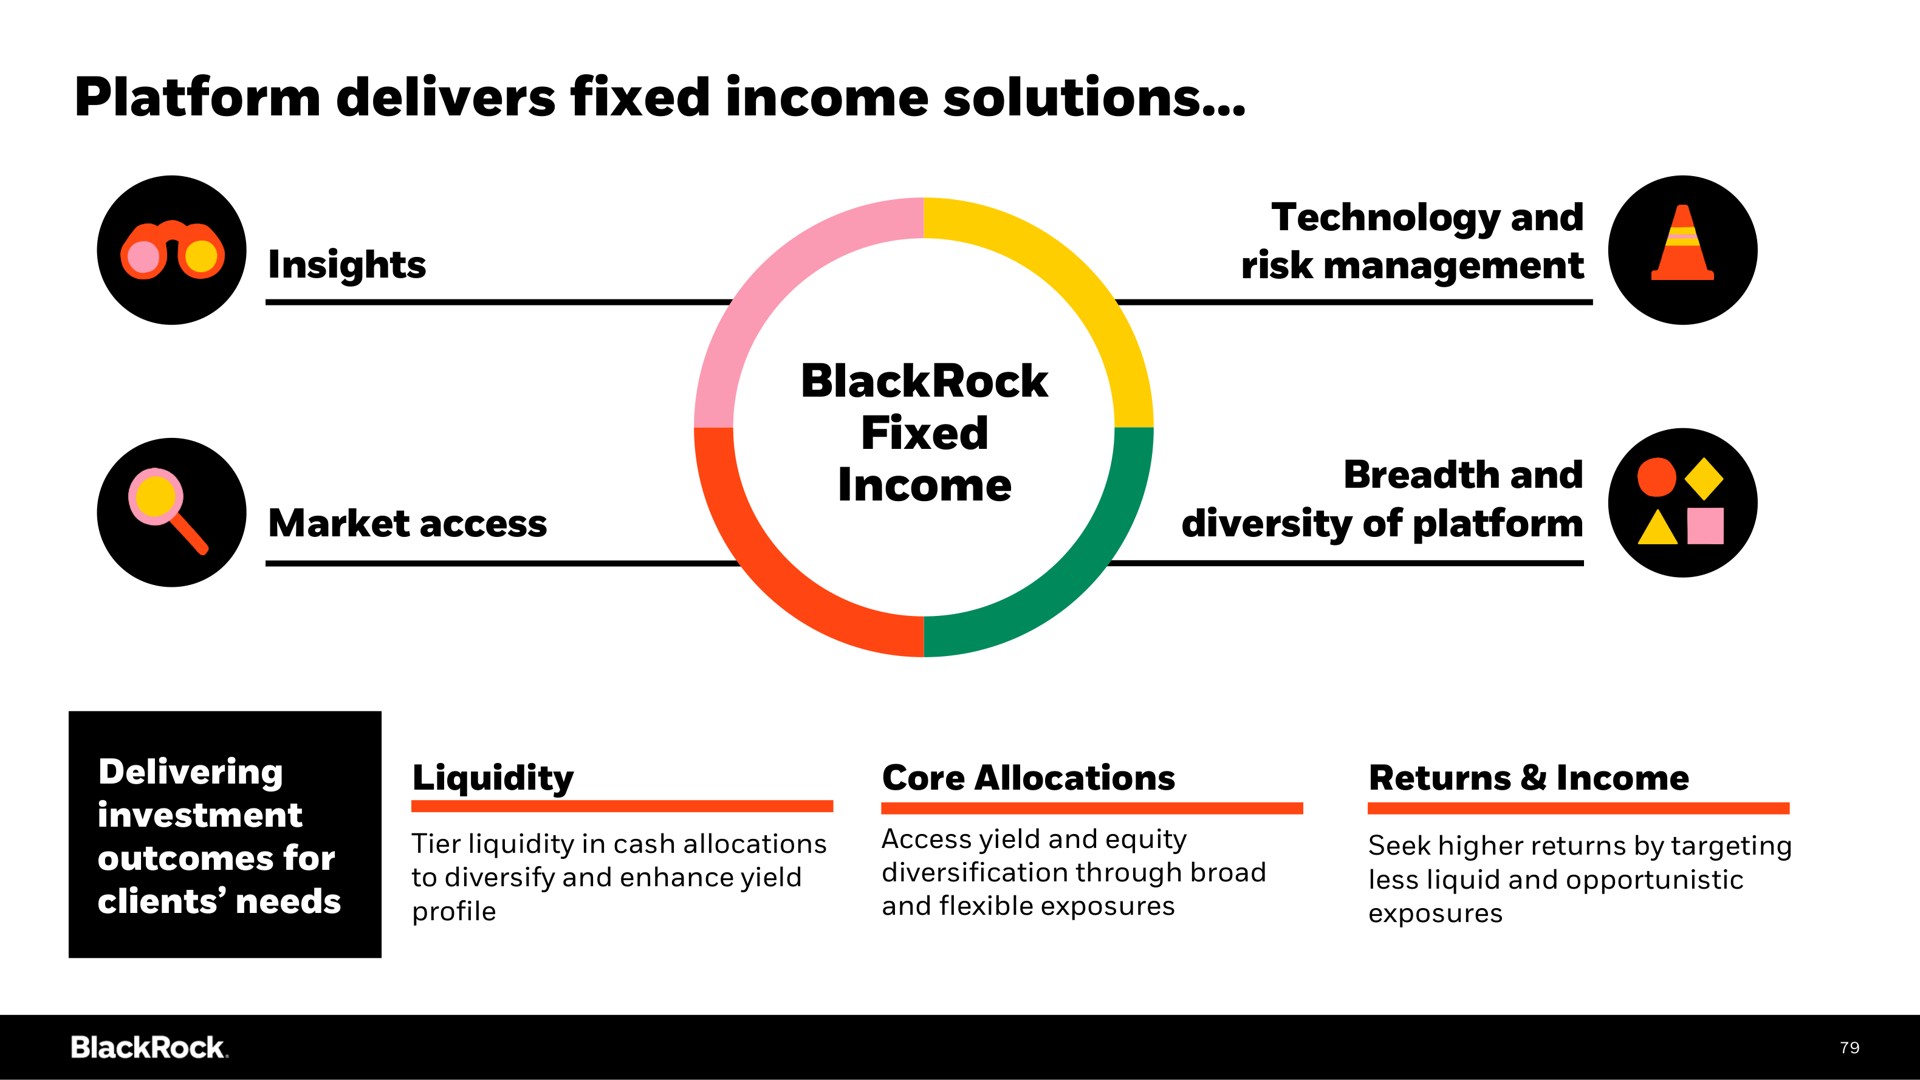 platform delivers fixed income solutions fixed income | BlackRock